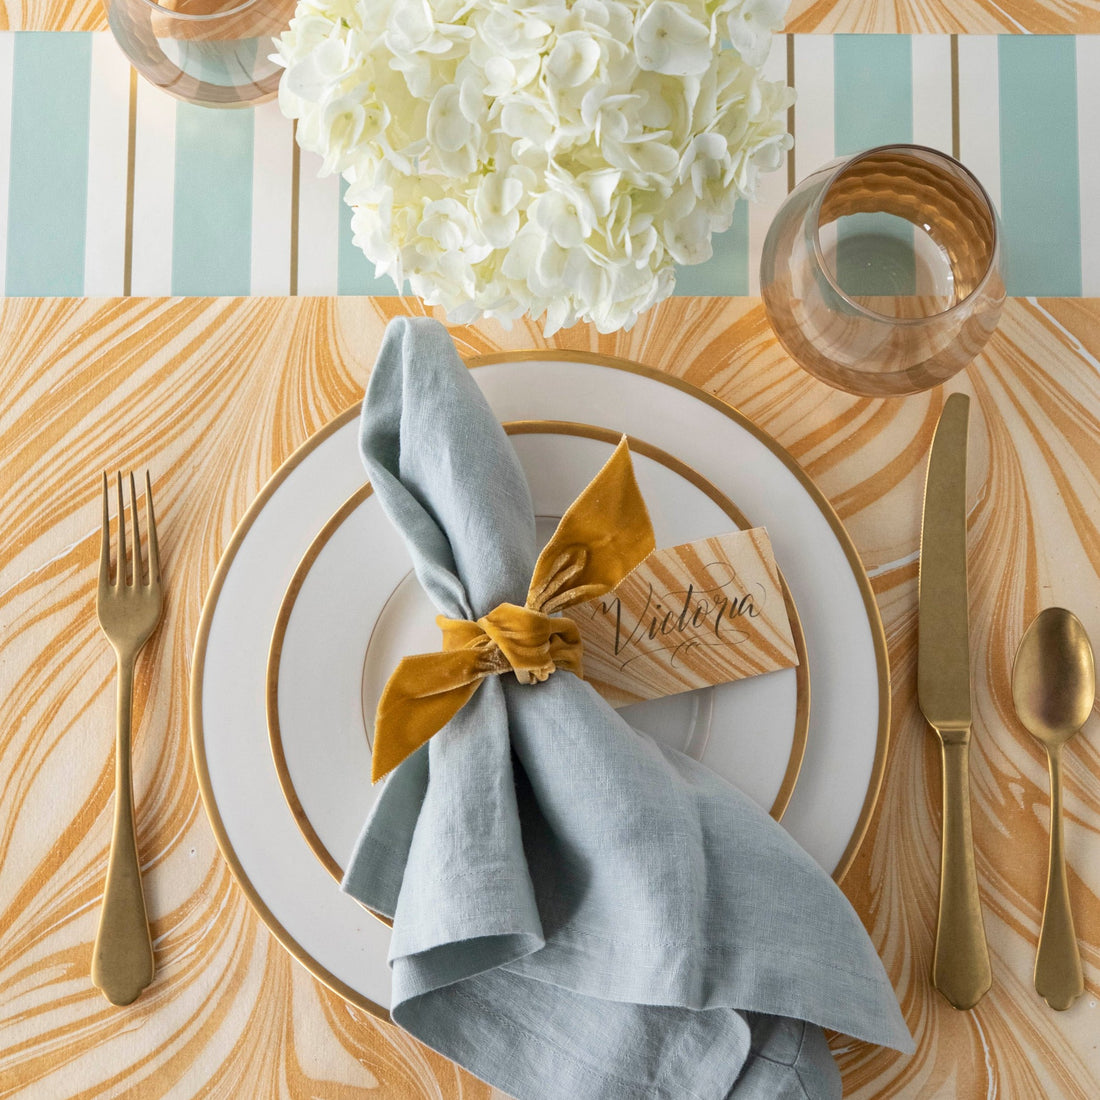 The Gold Leaf Marbled Placemat under an elegant table setting, from above.